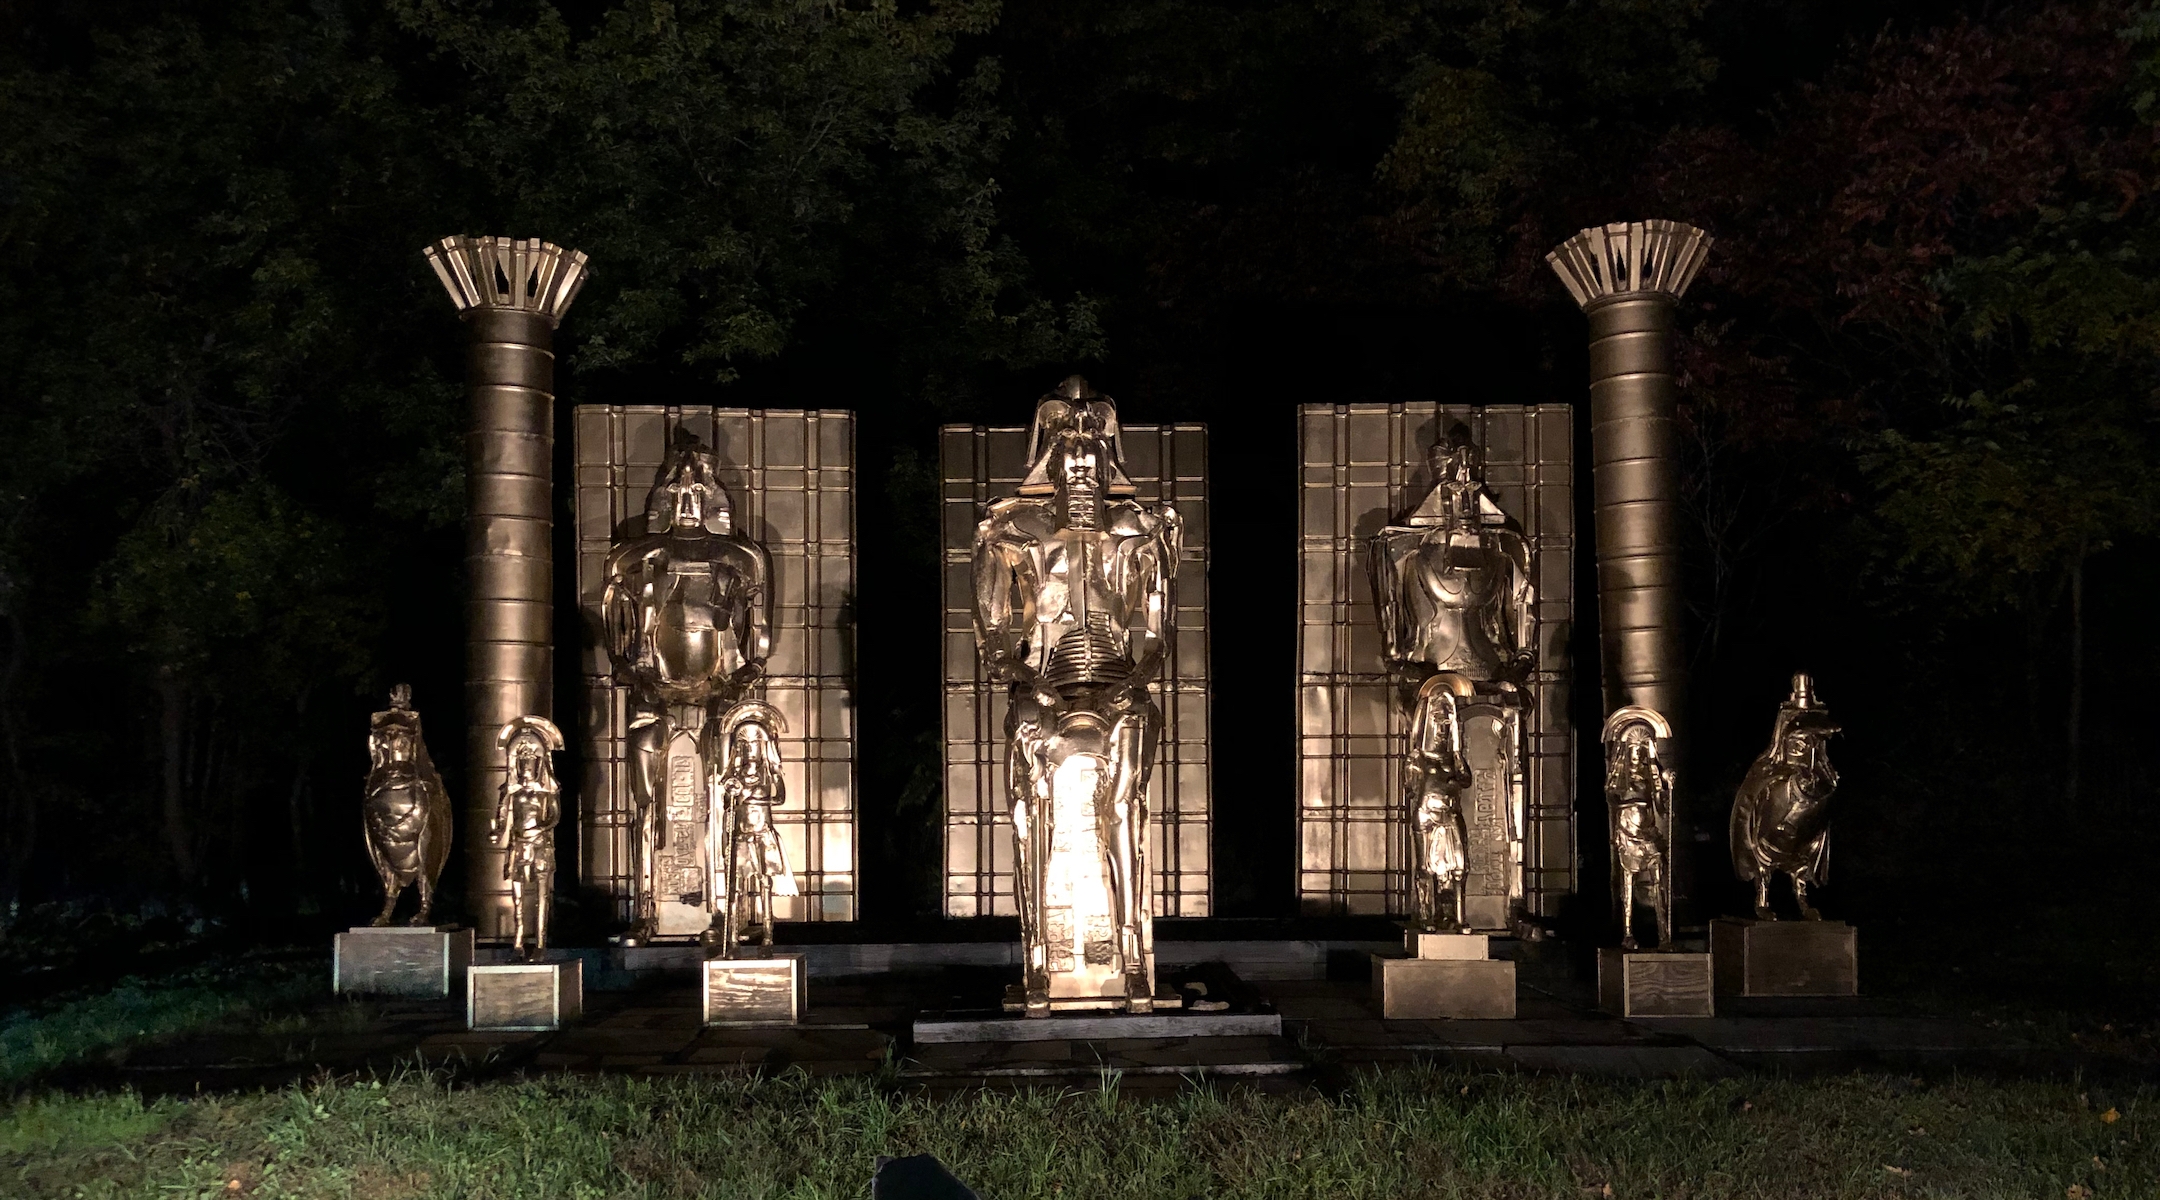 Large Egyptian-themed statues lit up at night